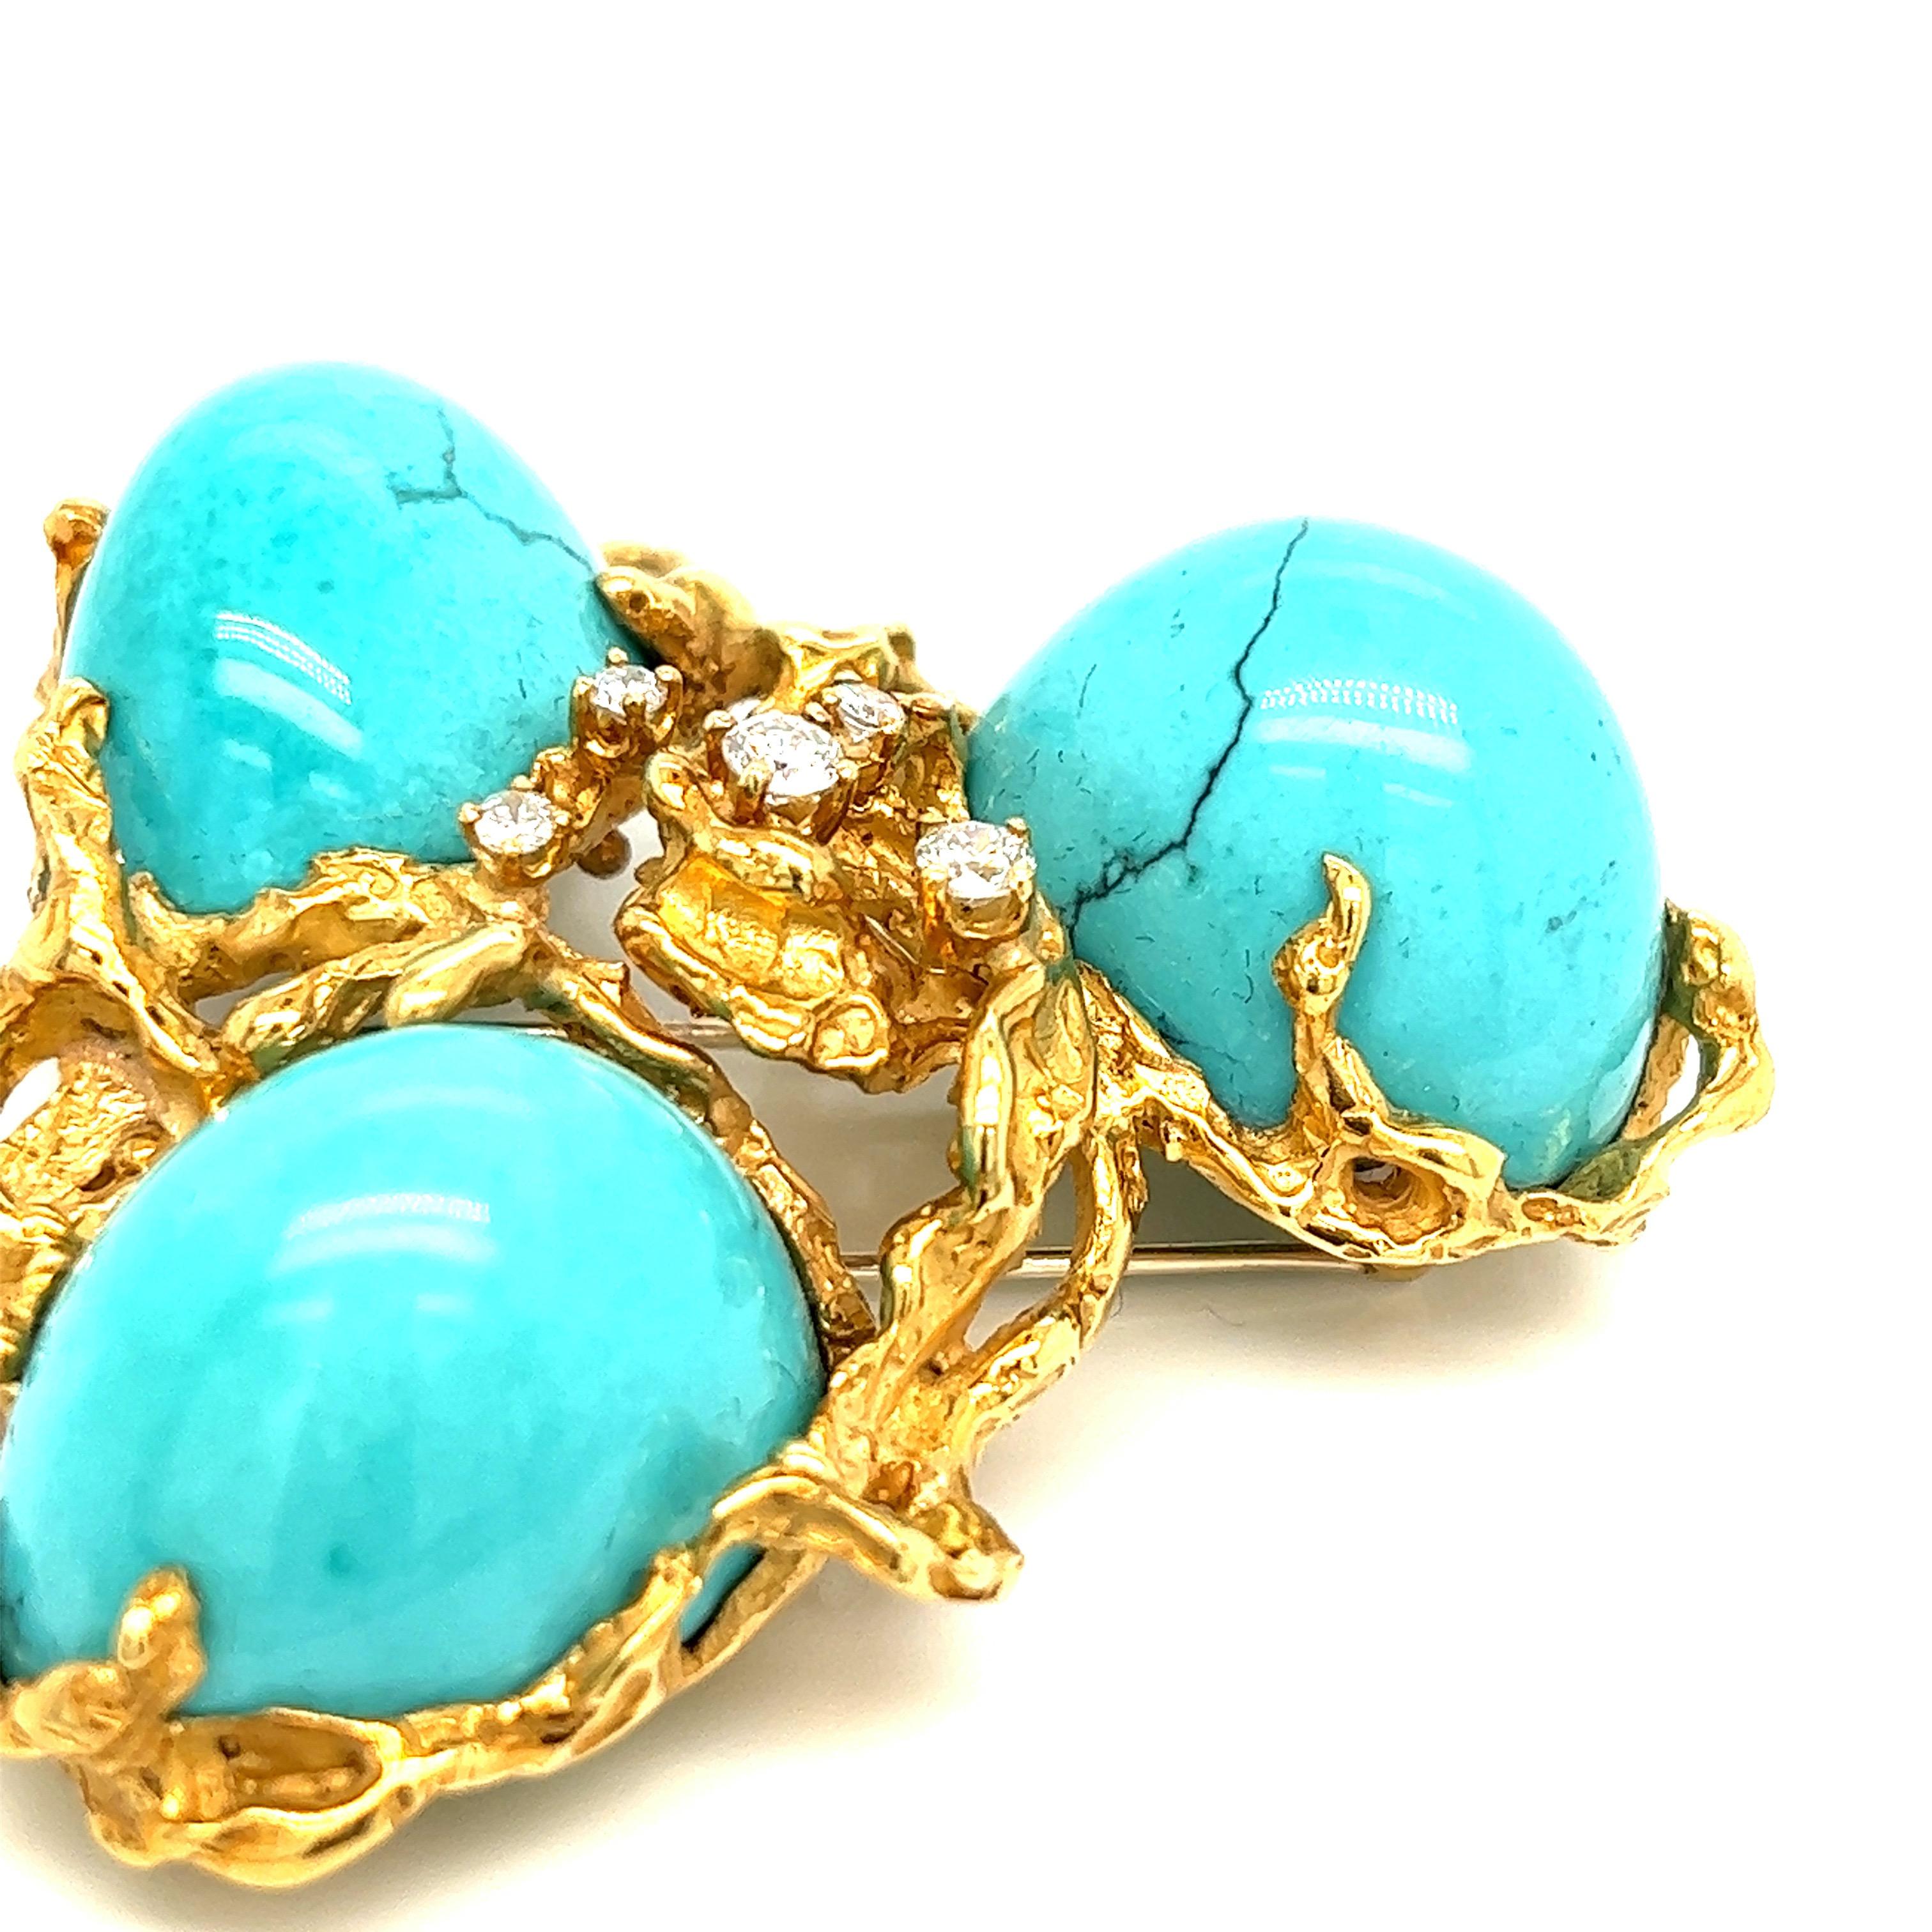 Arthur King turquoise gold pendant brooch, large model

Round-cut diamonds of approximately 0.58 carat, three turquoises each measuring approximately 22.5 x 17 mm, 18 karat yellow gold; marked King, 18K

Size: width 2.25 inches, length 2.5